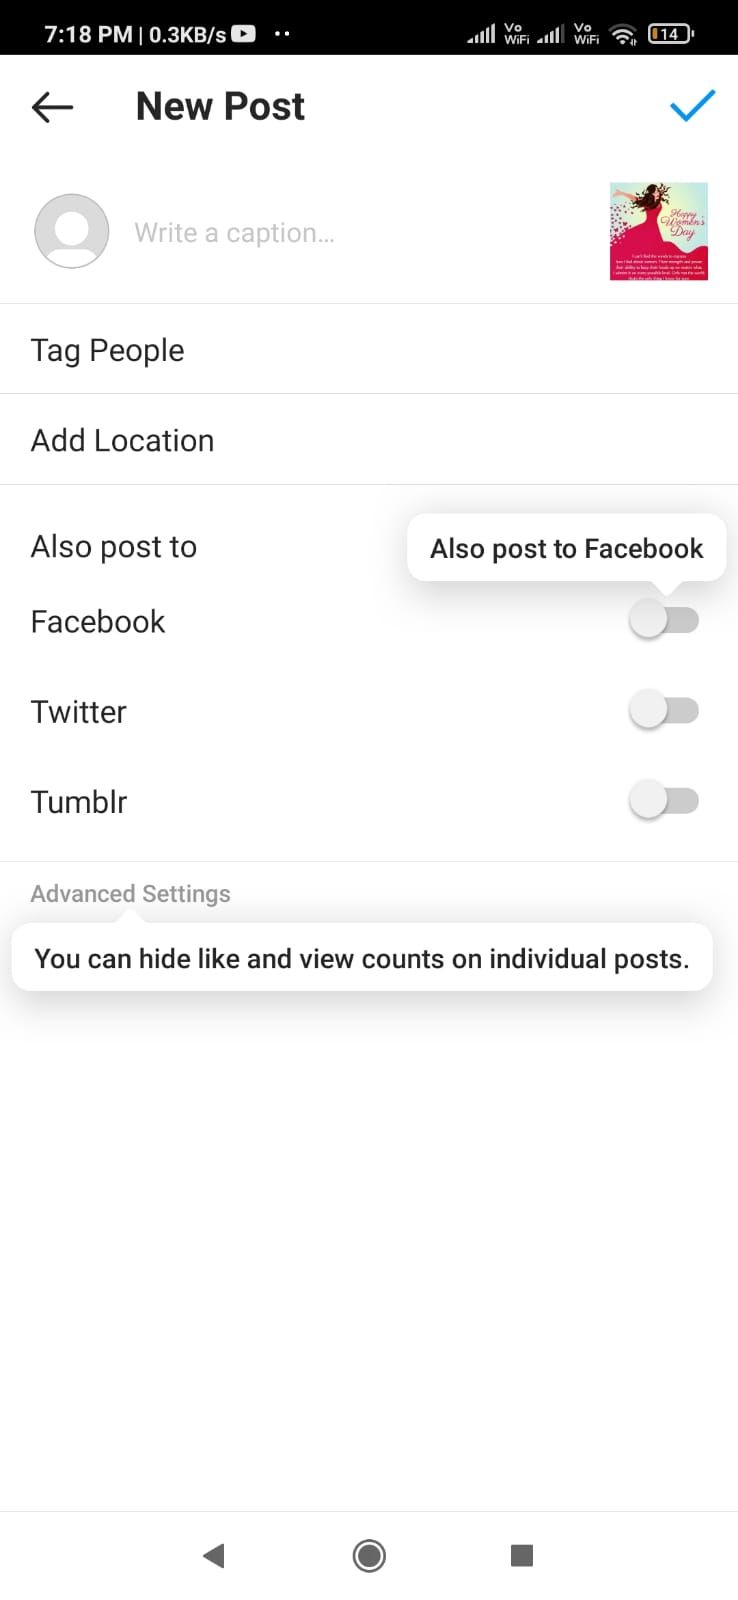 Instagram final post sharing page to tag people and add location